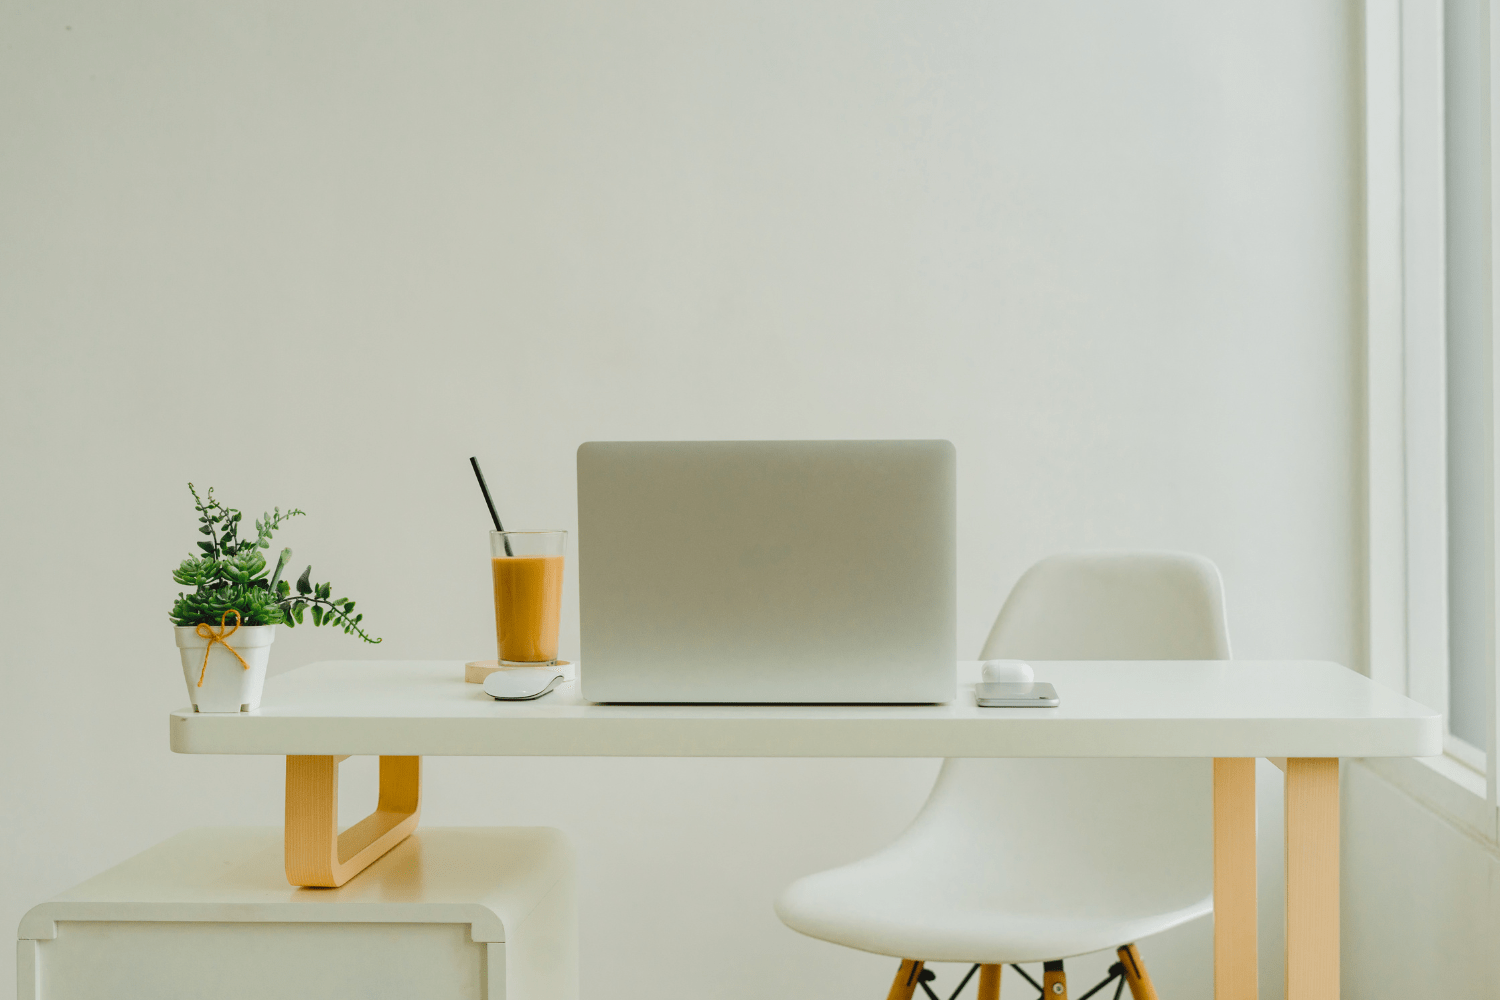 In recent times, the concept of working from home has evolved from a rare perk to a mainstream necessity. With the global shift towards remote work, the importance of a dedicated workspace within the home has become increasingly evident.